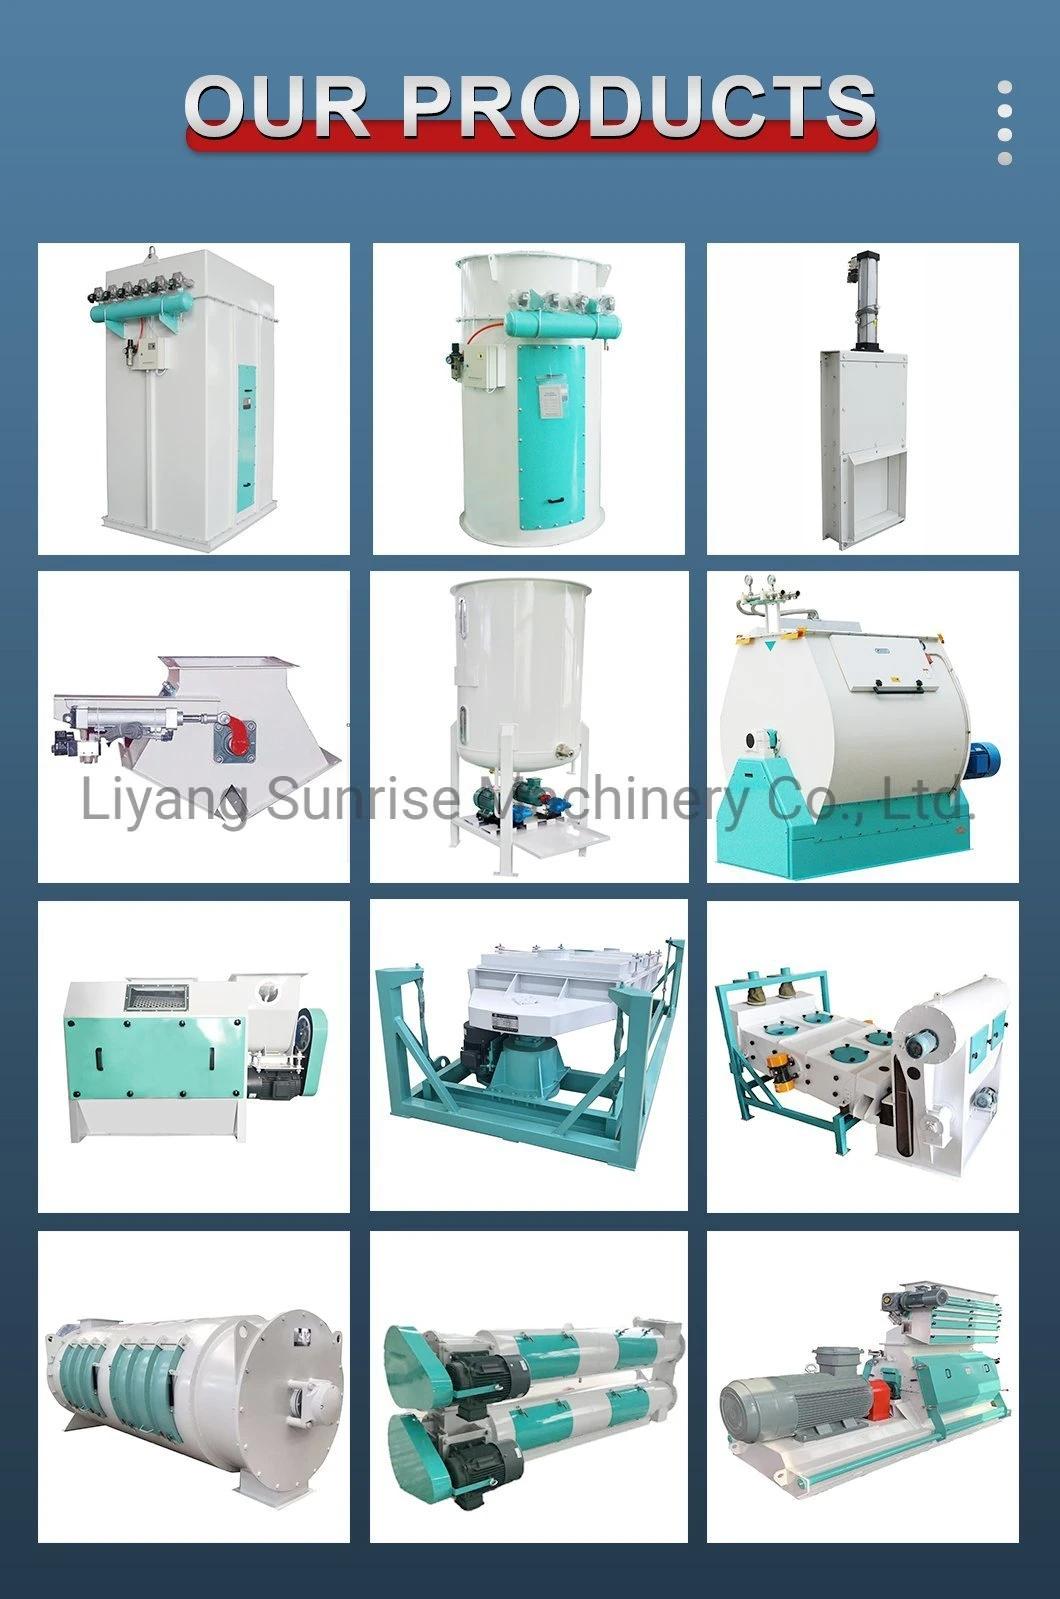 Hot Selling Manual Filling Hopper for Feed Mixer-Animal Feed Machine